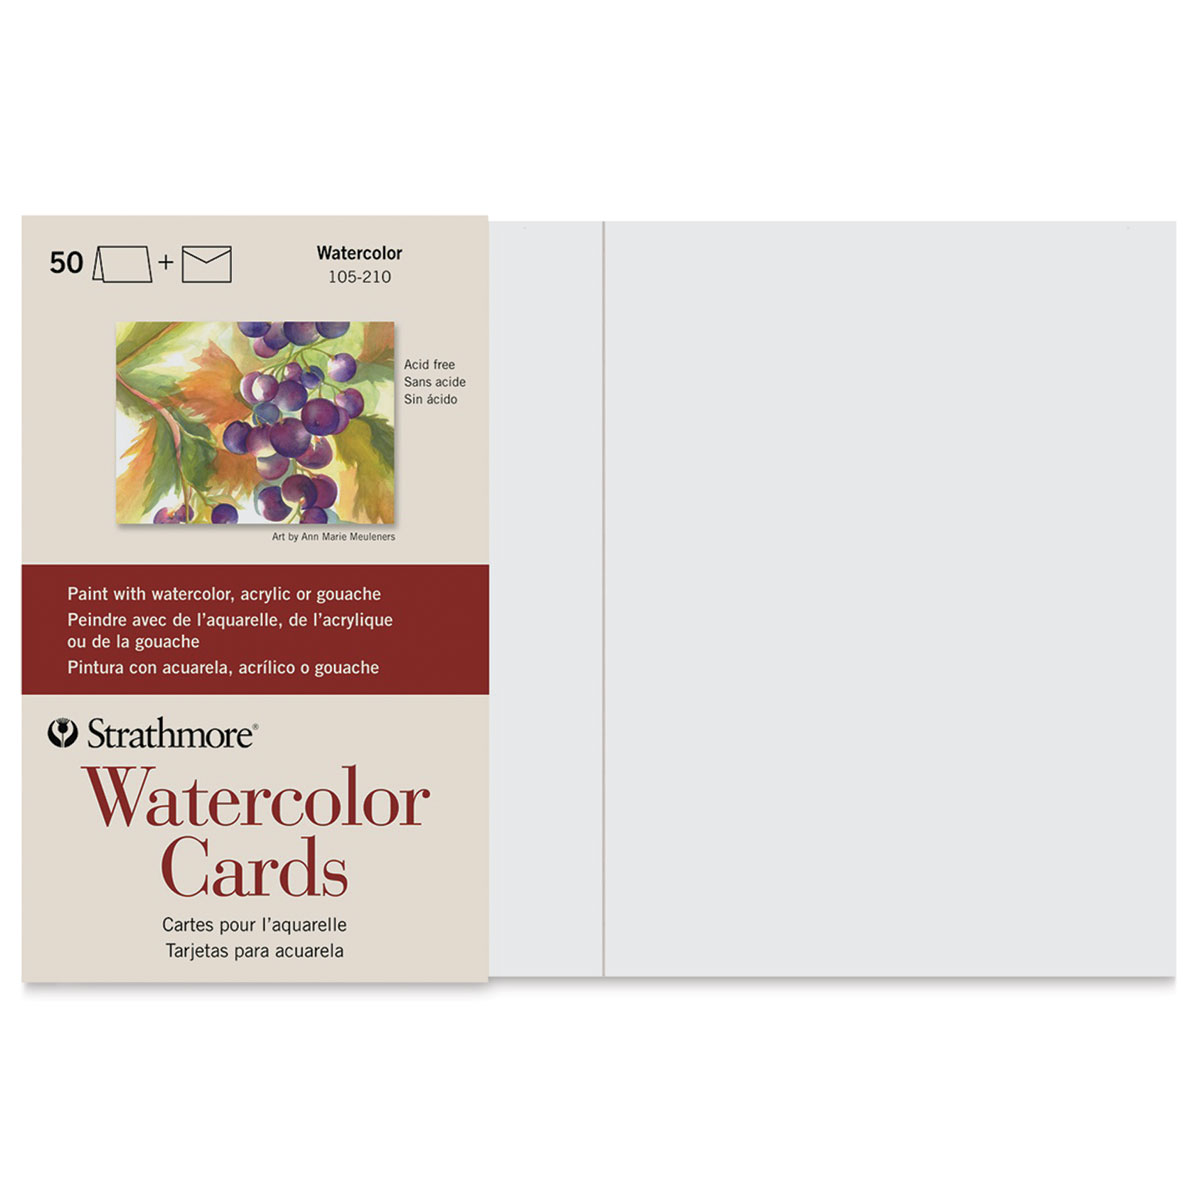 Strathmore Blank Watercolor Greeting Cards Full Size 5x6-7/8 (50 Pack  Cards & Envelopes)